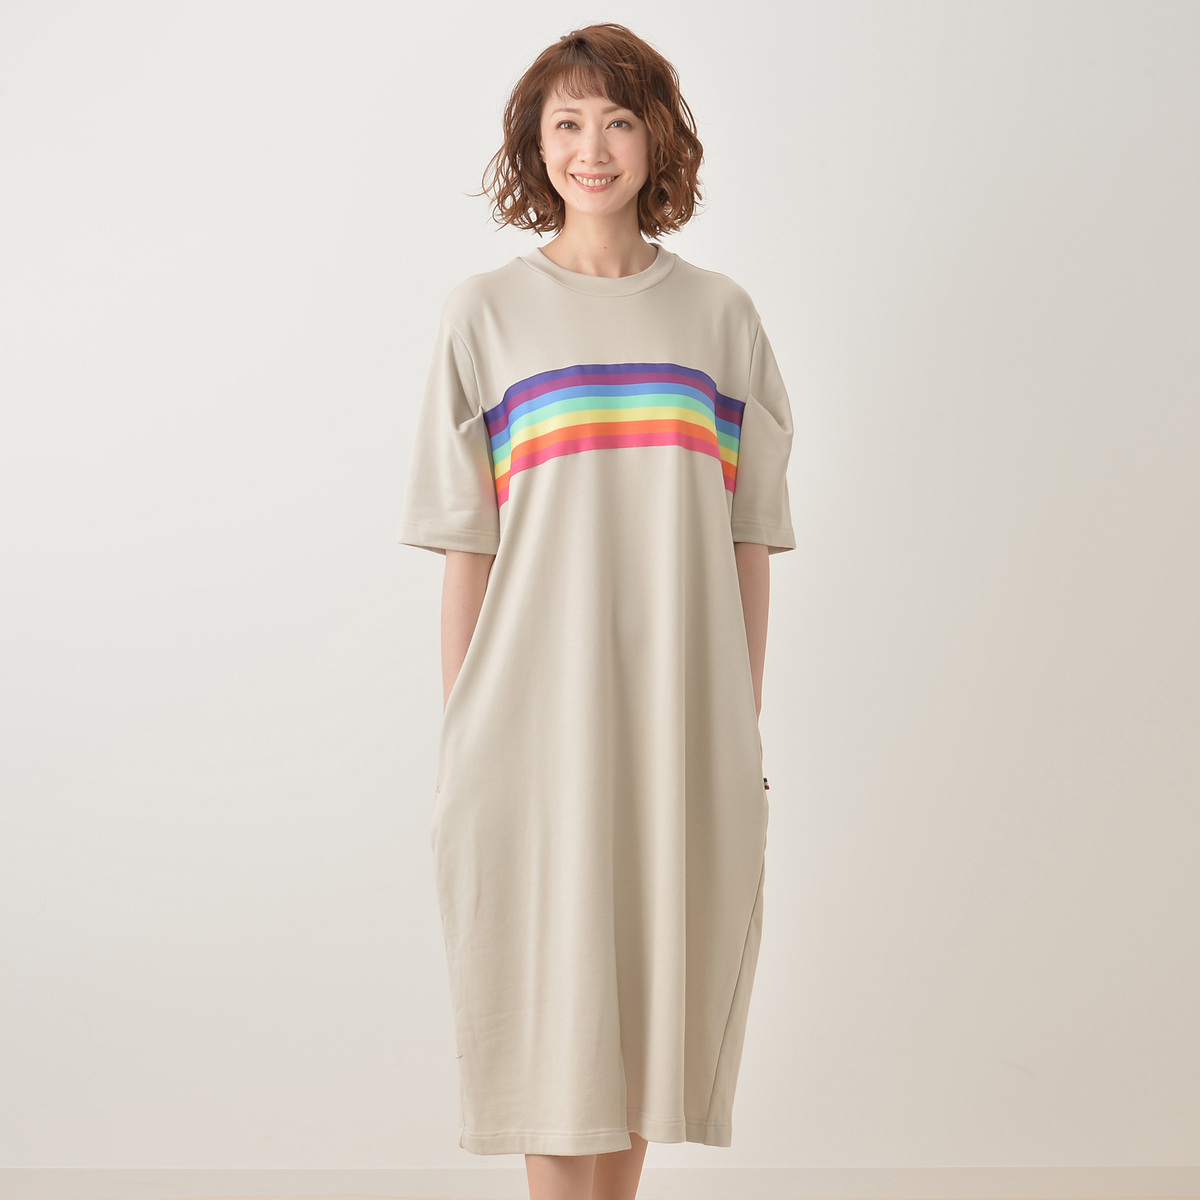 Persons カットソーワンピース パーソンズ Persons No Qvc Jp